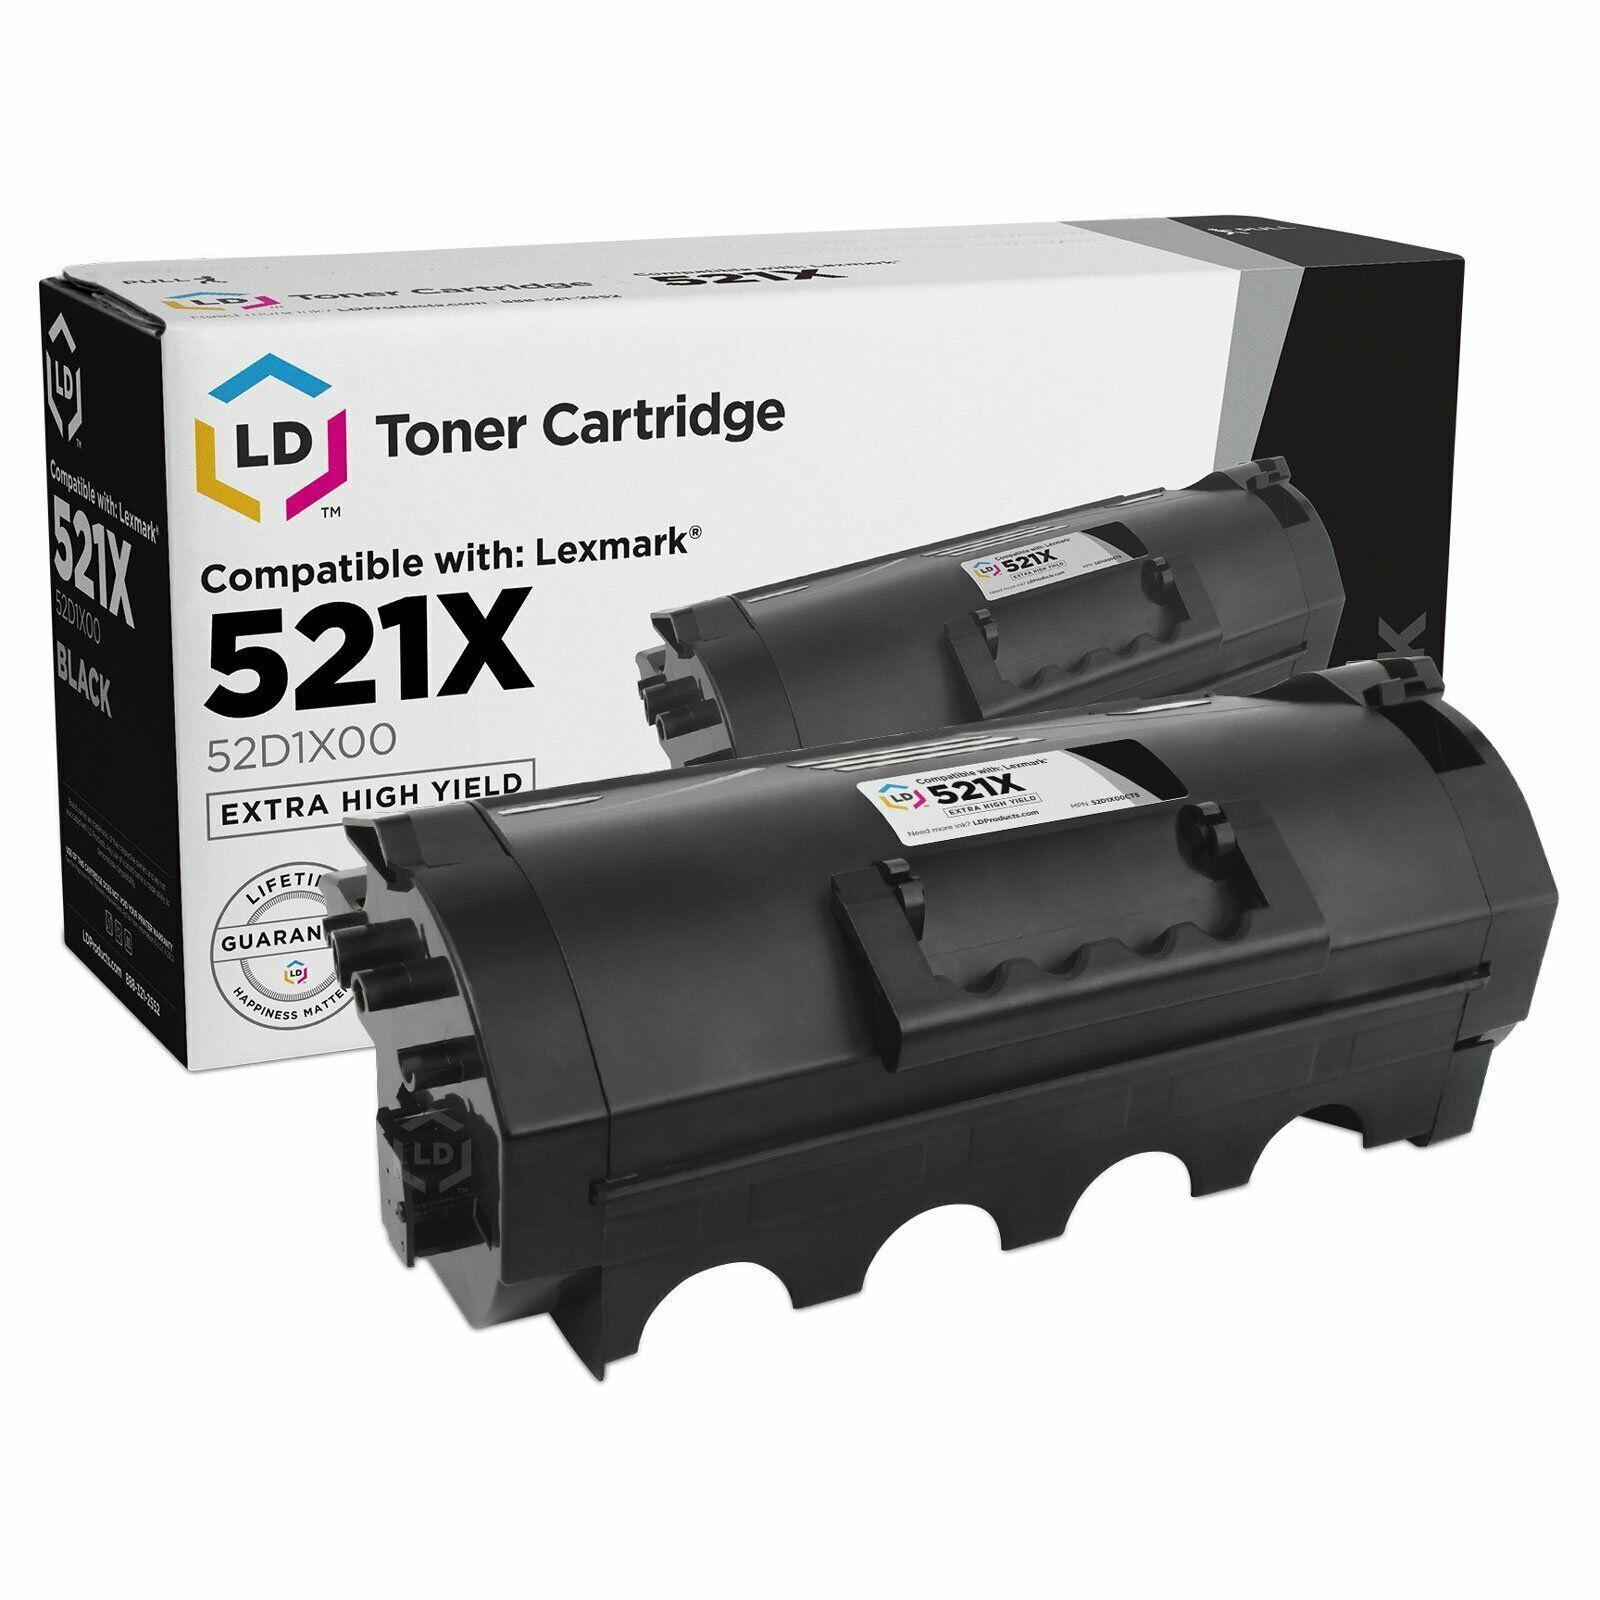 LD Compatible Lexmark 52D1X00 / 521X EHY BLK Toner for MS811/MS812 Series